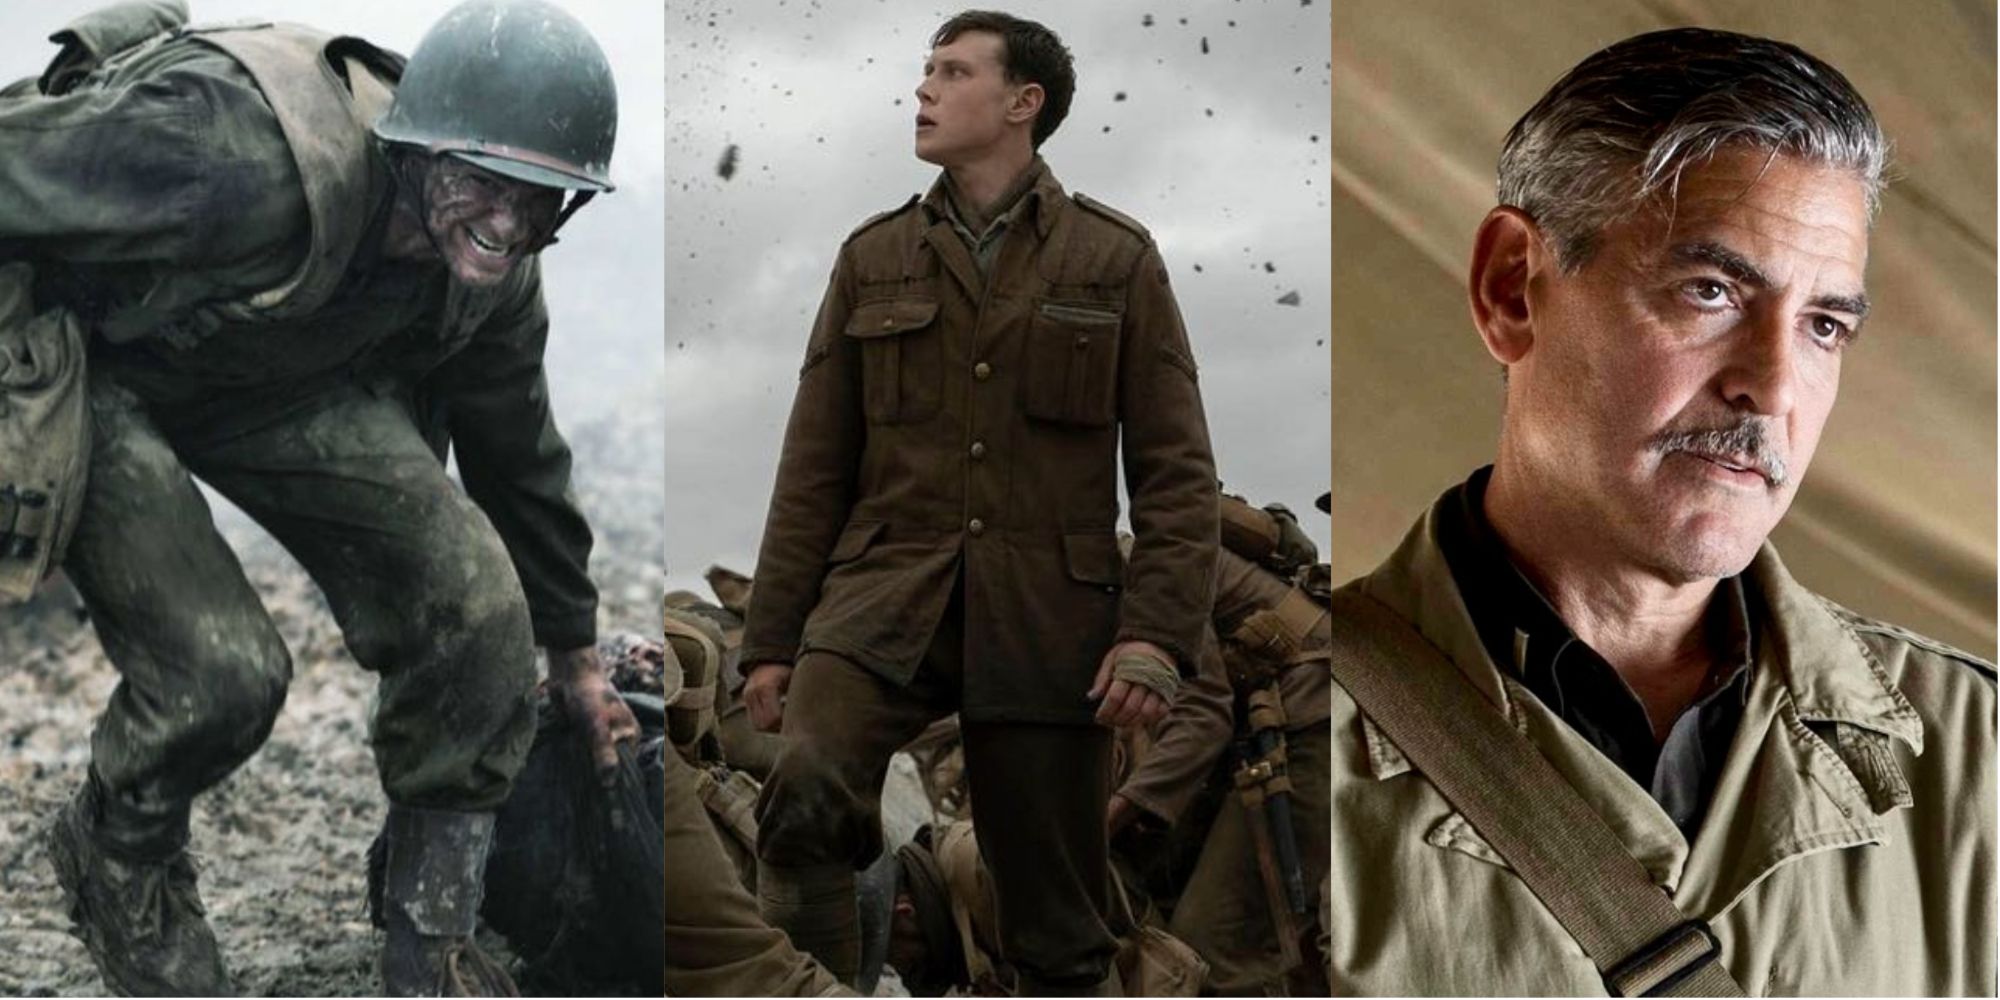 A split image of 1917, Hacksaw Ridge, and The Thin Red Line.